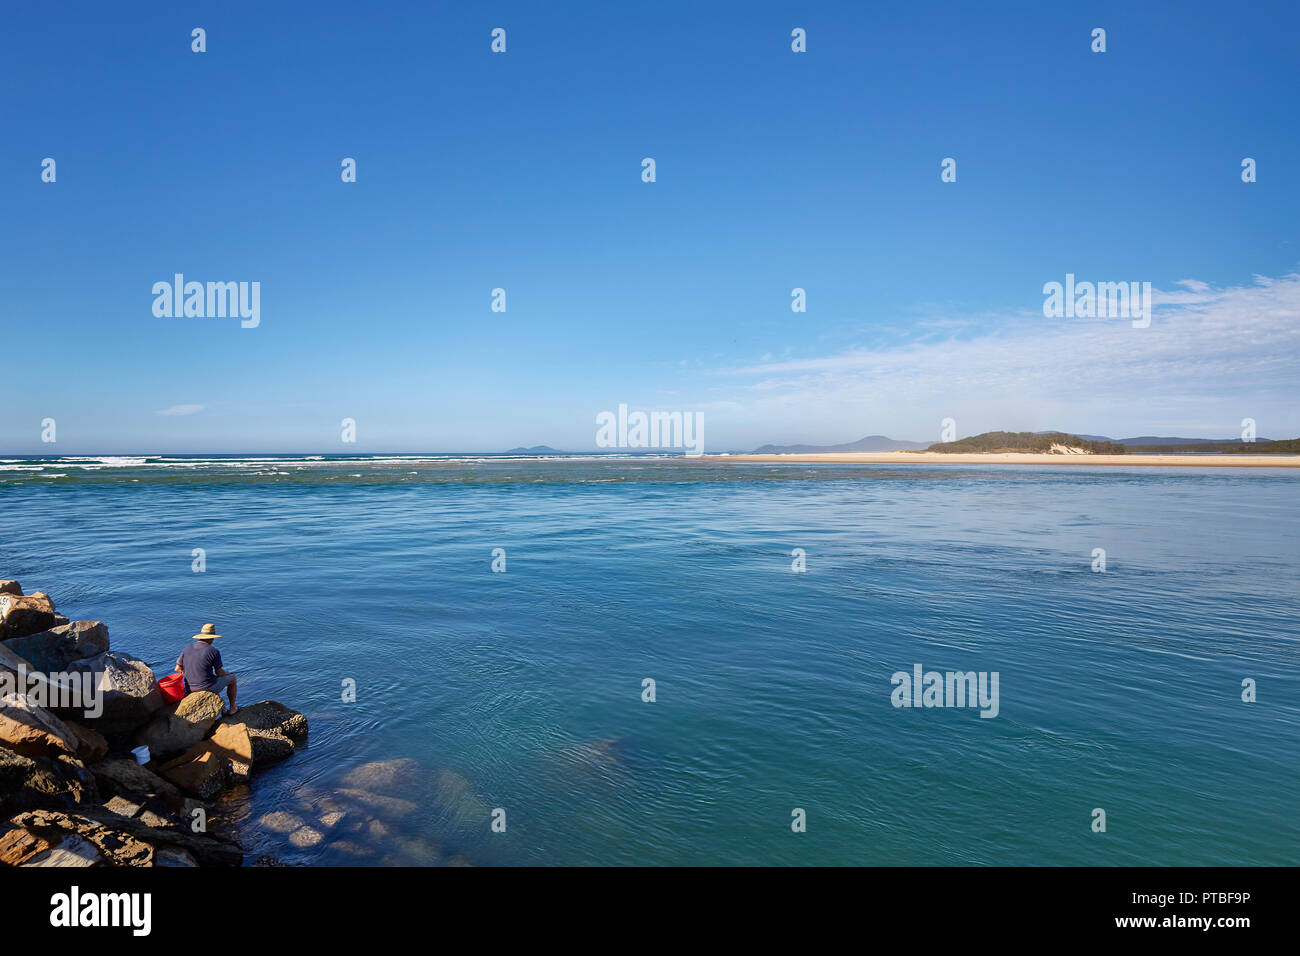 A man on his own wearing a hat sat on the boulders at the sea edge at Nambucca Heads, New South Wales, Australia Stock Photo